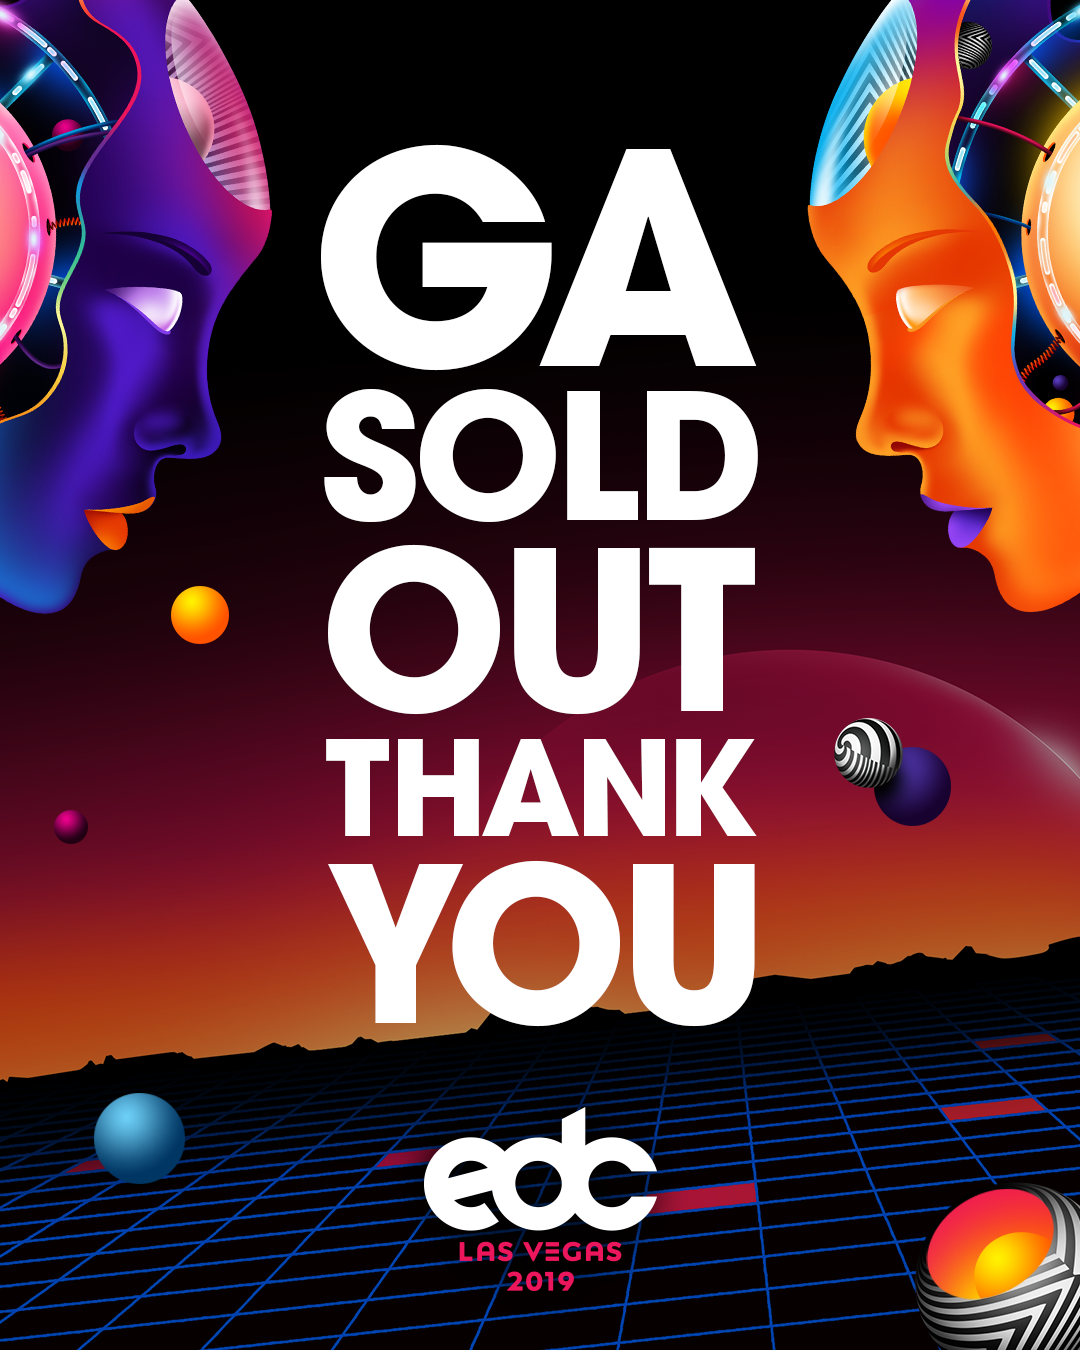 This Year&#39;s EDC Las Vegas 2019 Will Be The Largest Dance Music Festival In The World - GDE